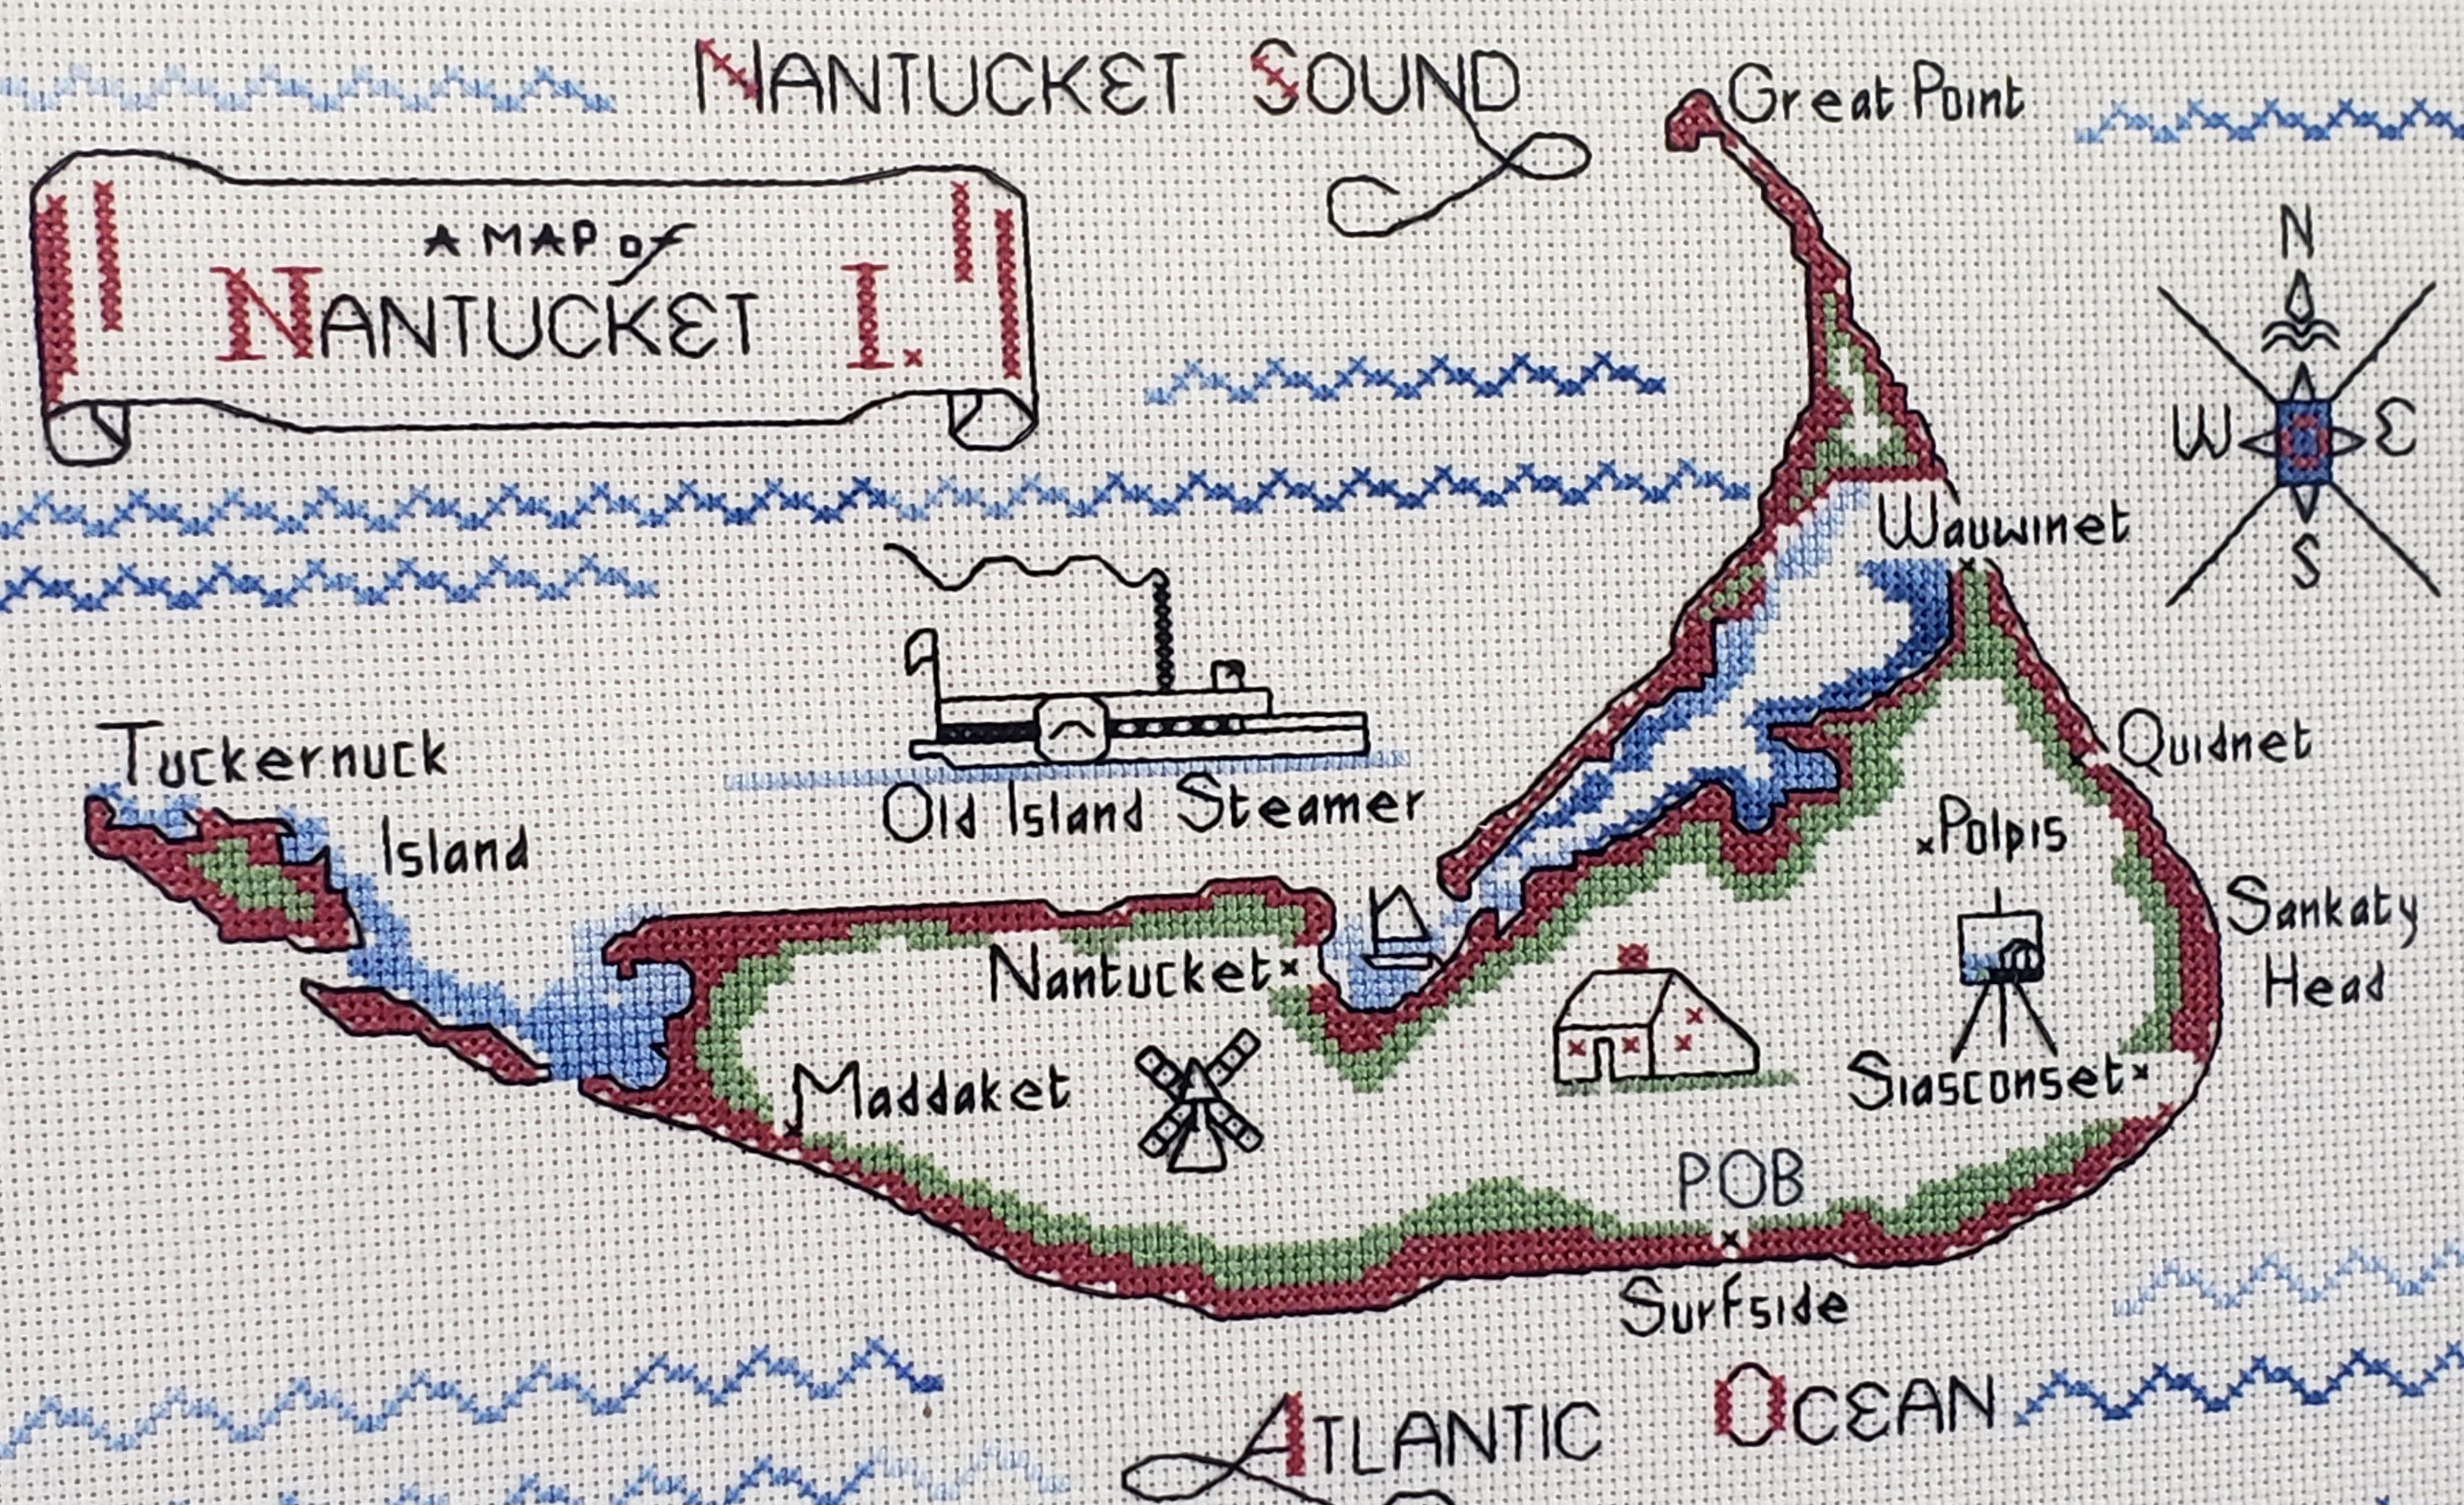 Vintage Needlepoint Pictorial Map of Nantucket, 20th century